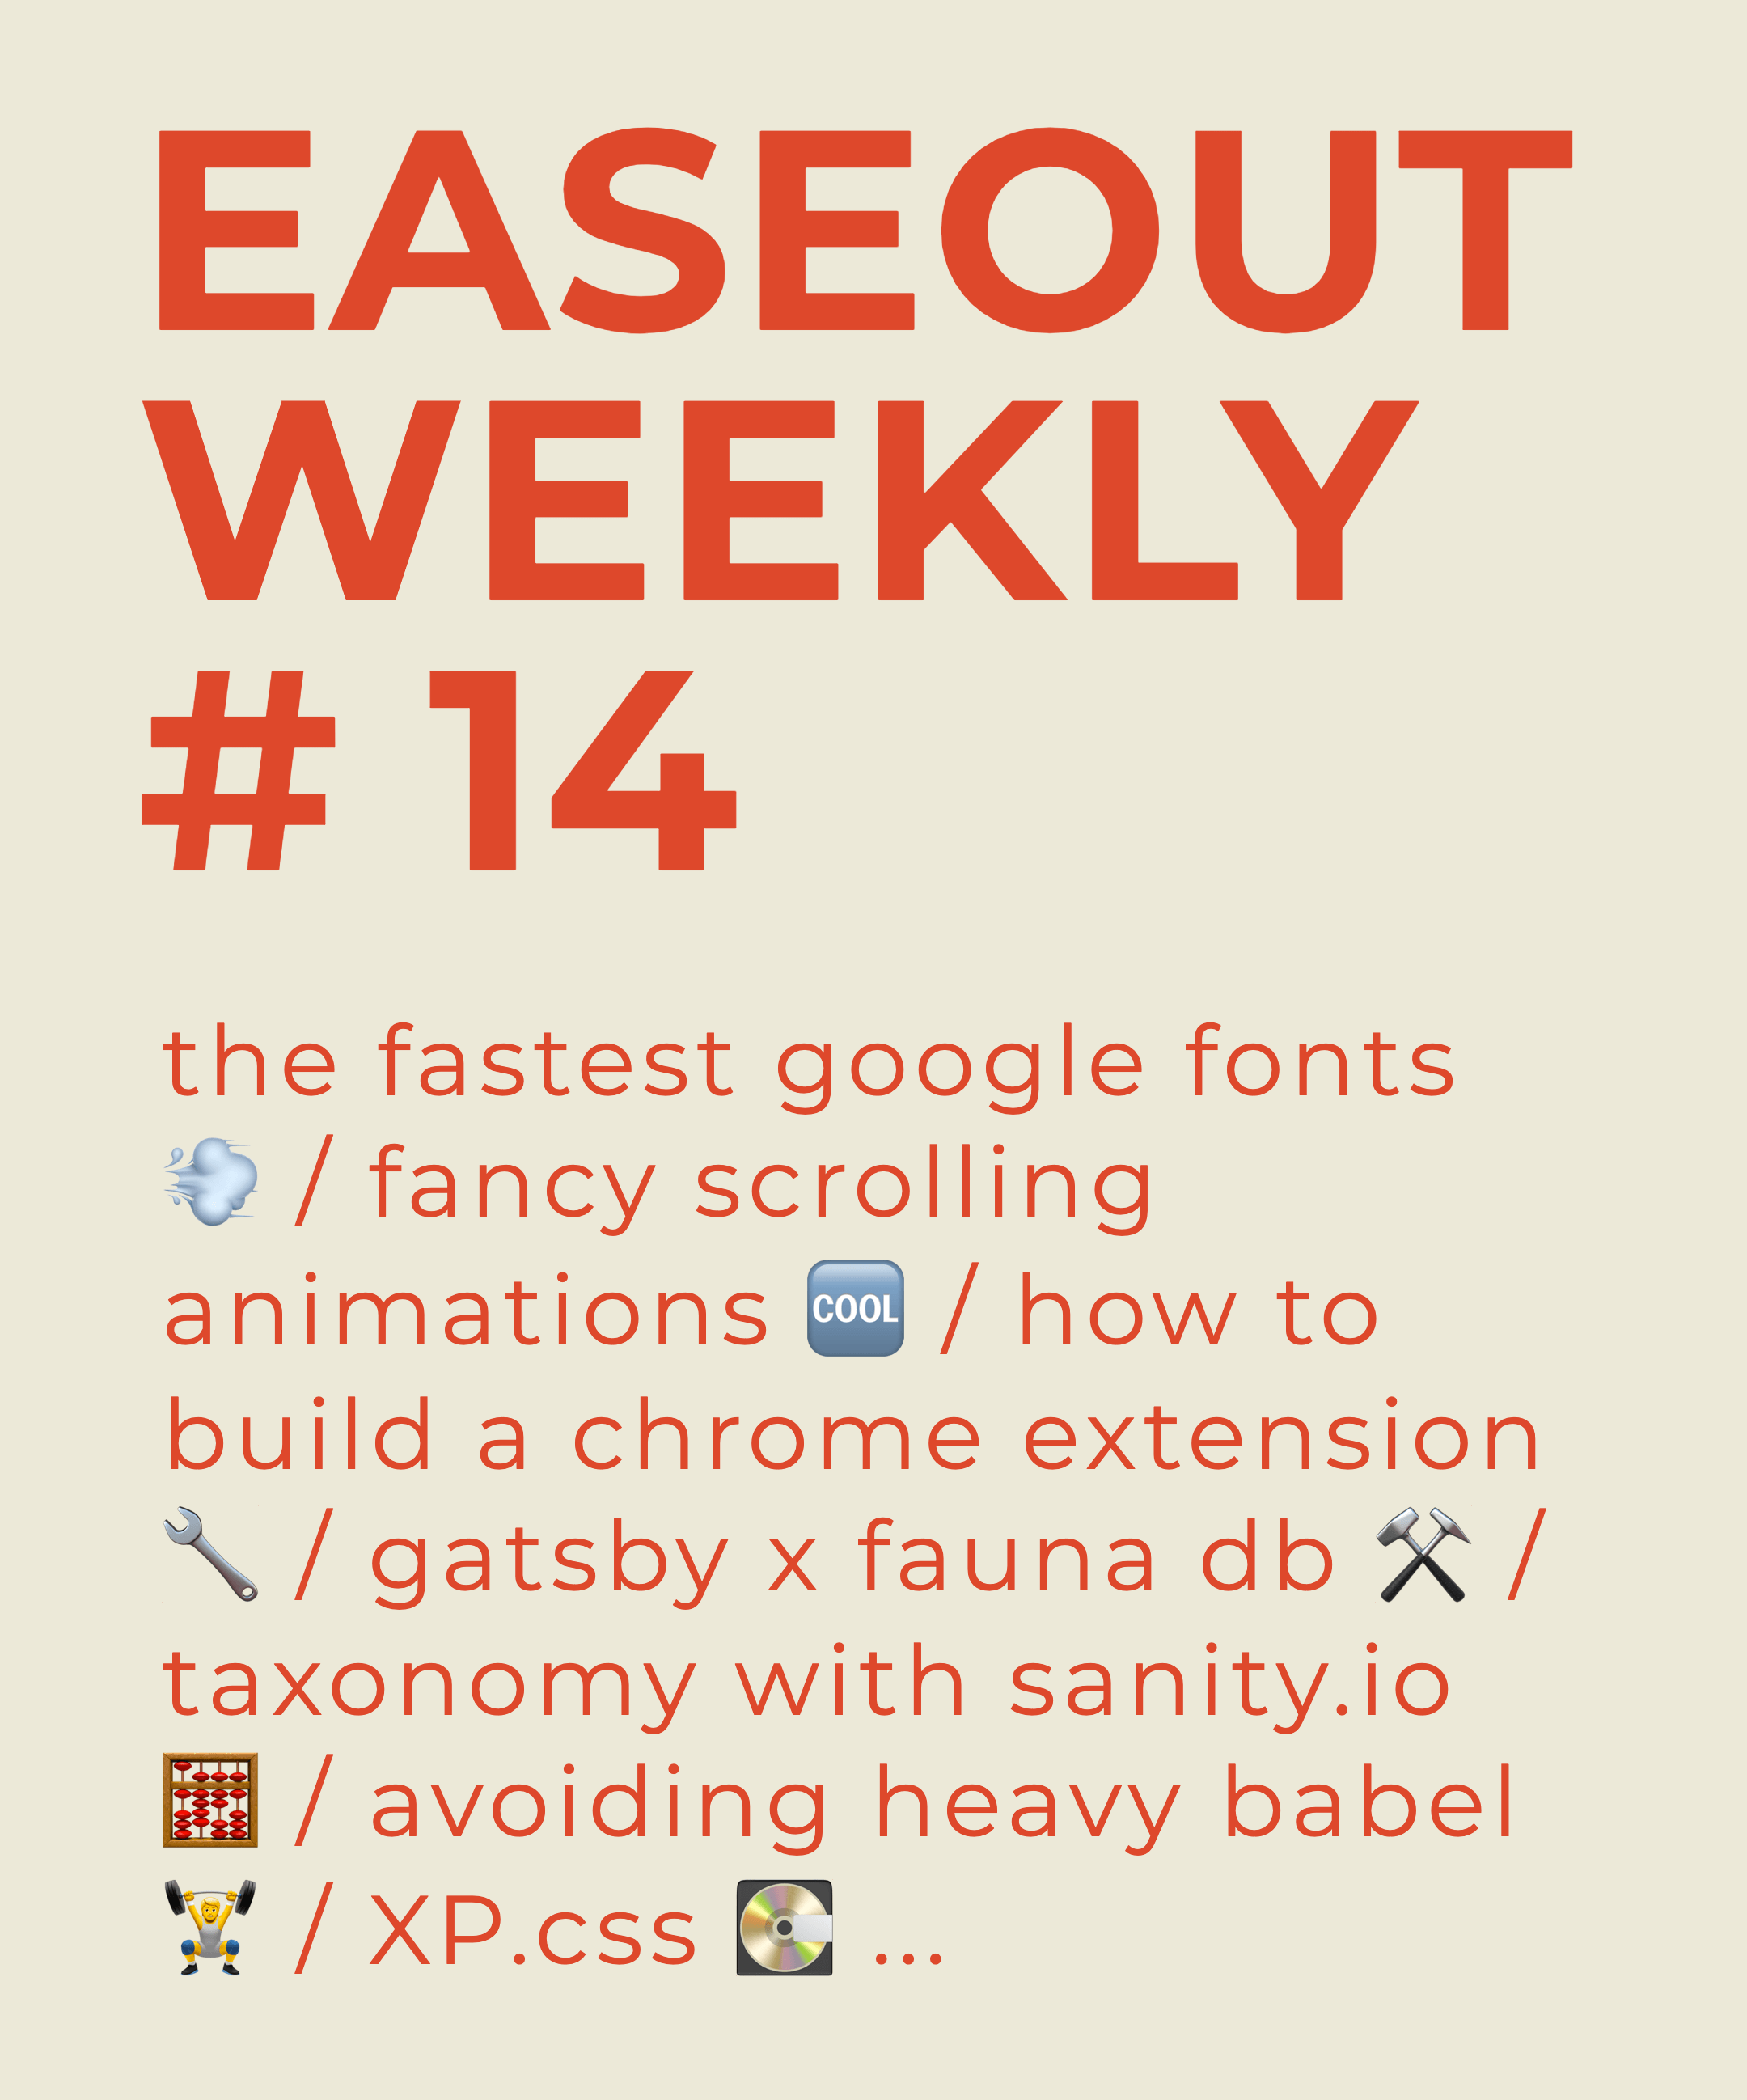 Easeout Weekly #14